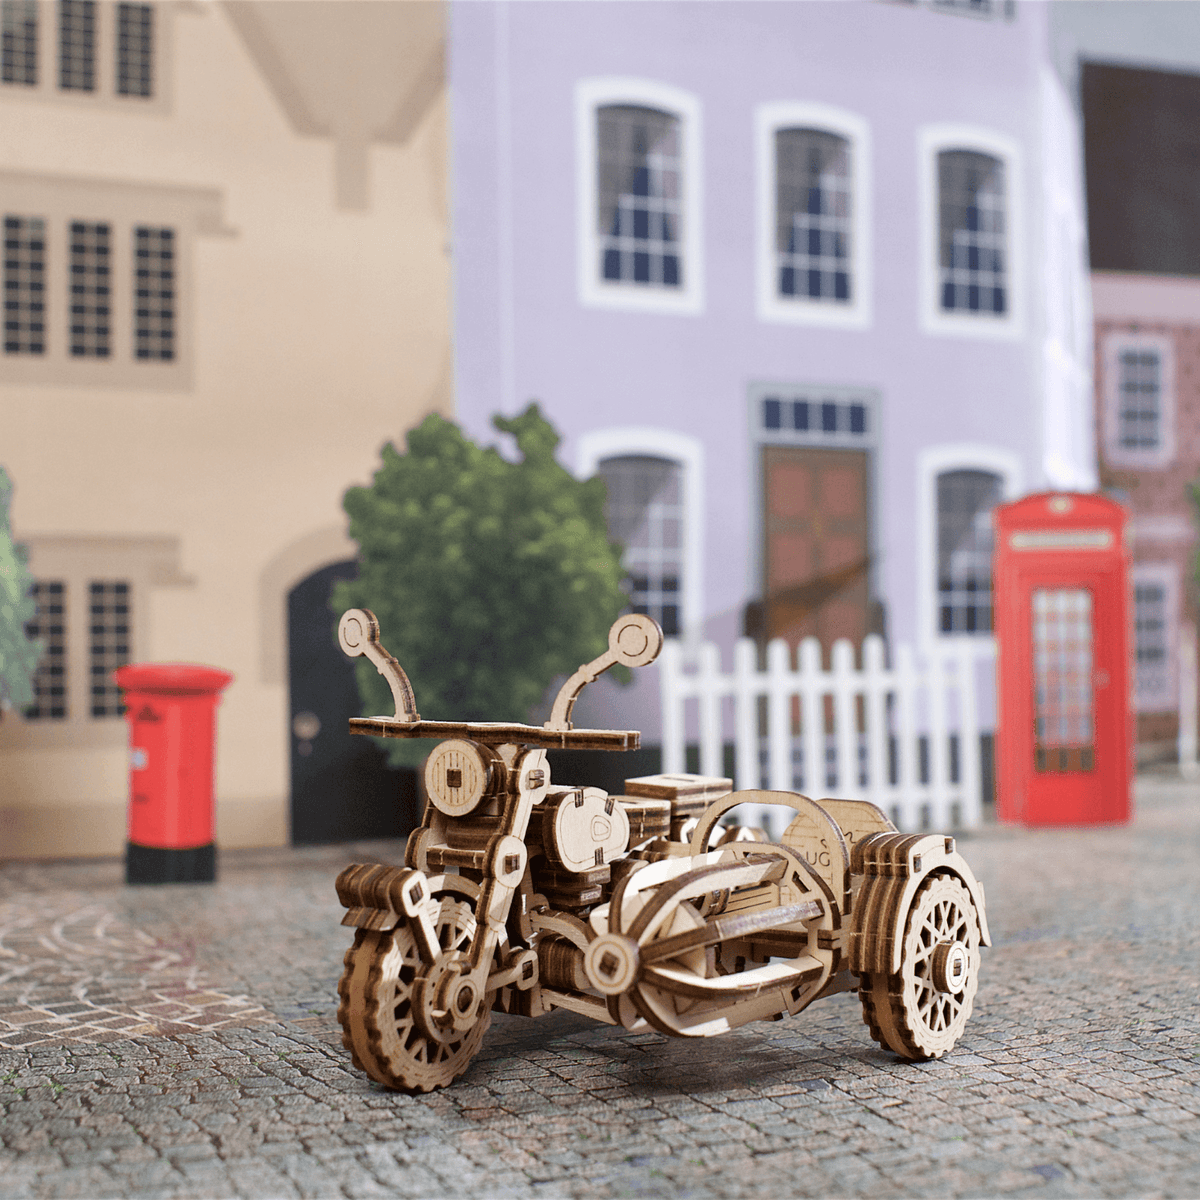 Hagrid's Flying Motorcycle™ | Harry Potter Mechanical Wooden Puzzle Ugears--.